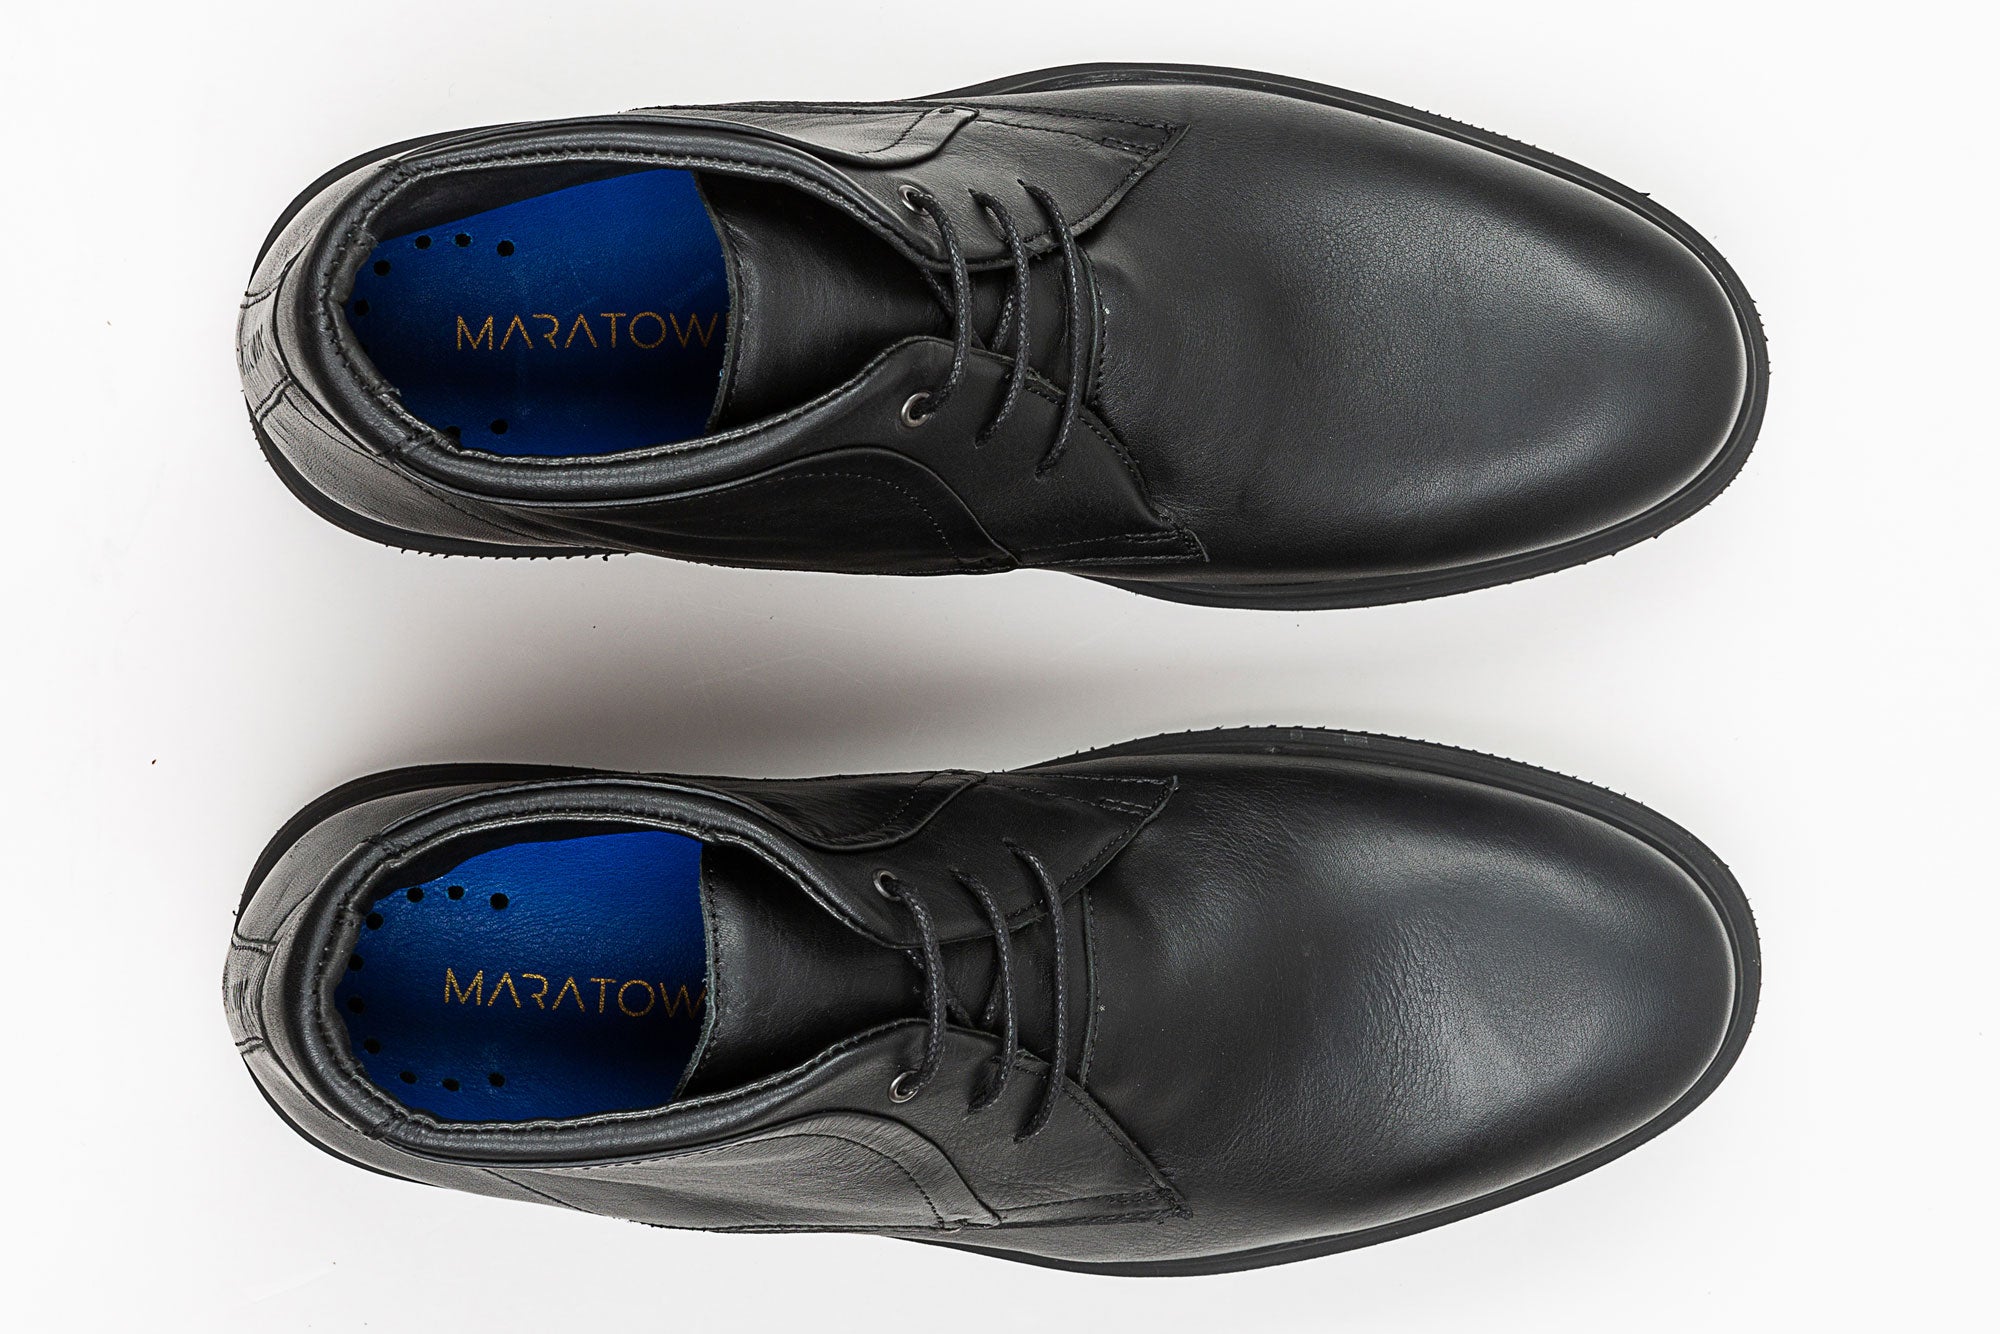 what are the most comfortable dress shoes for walking